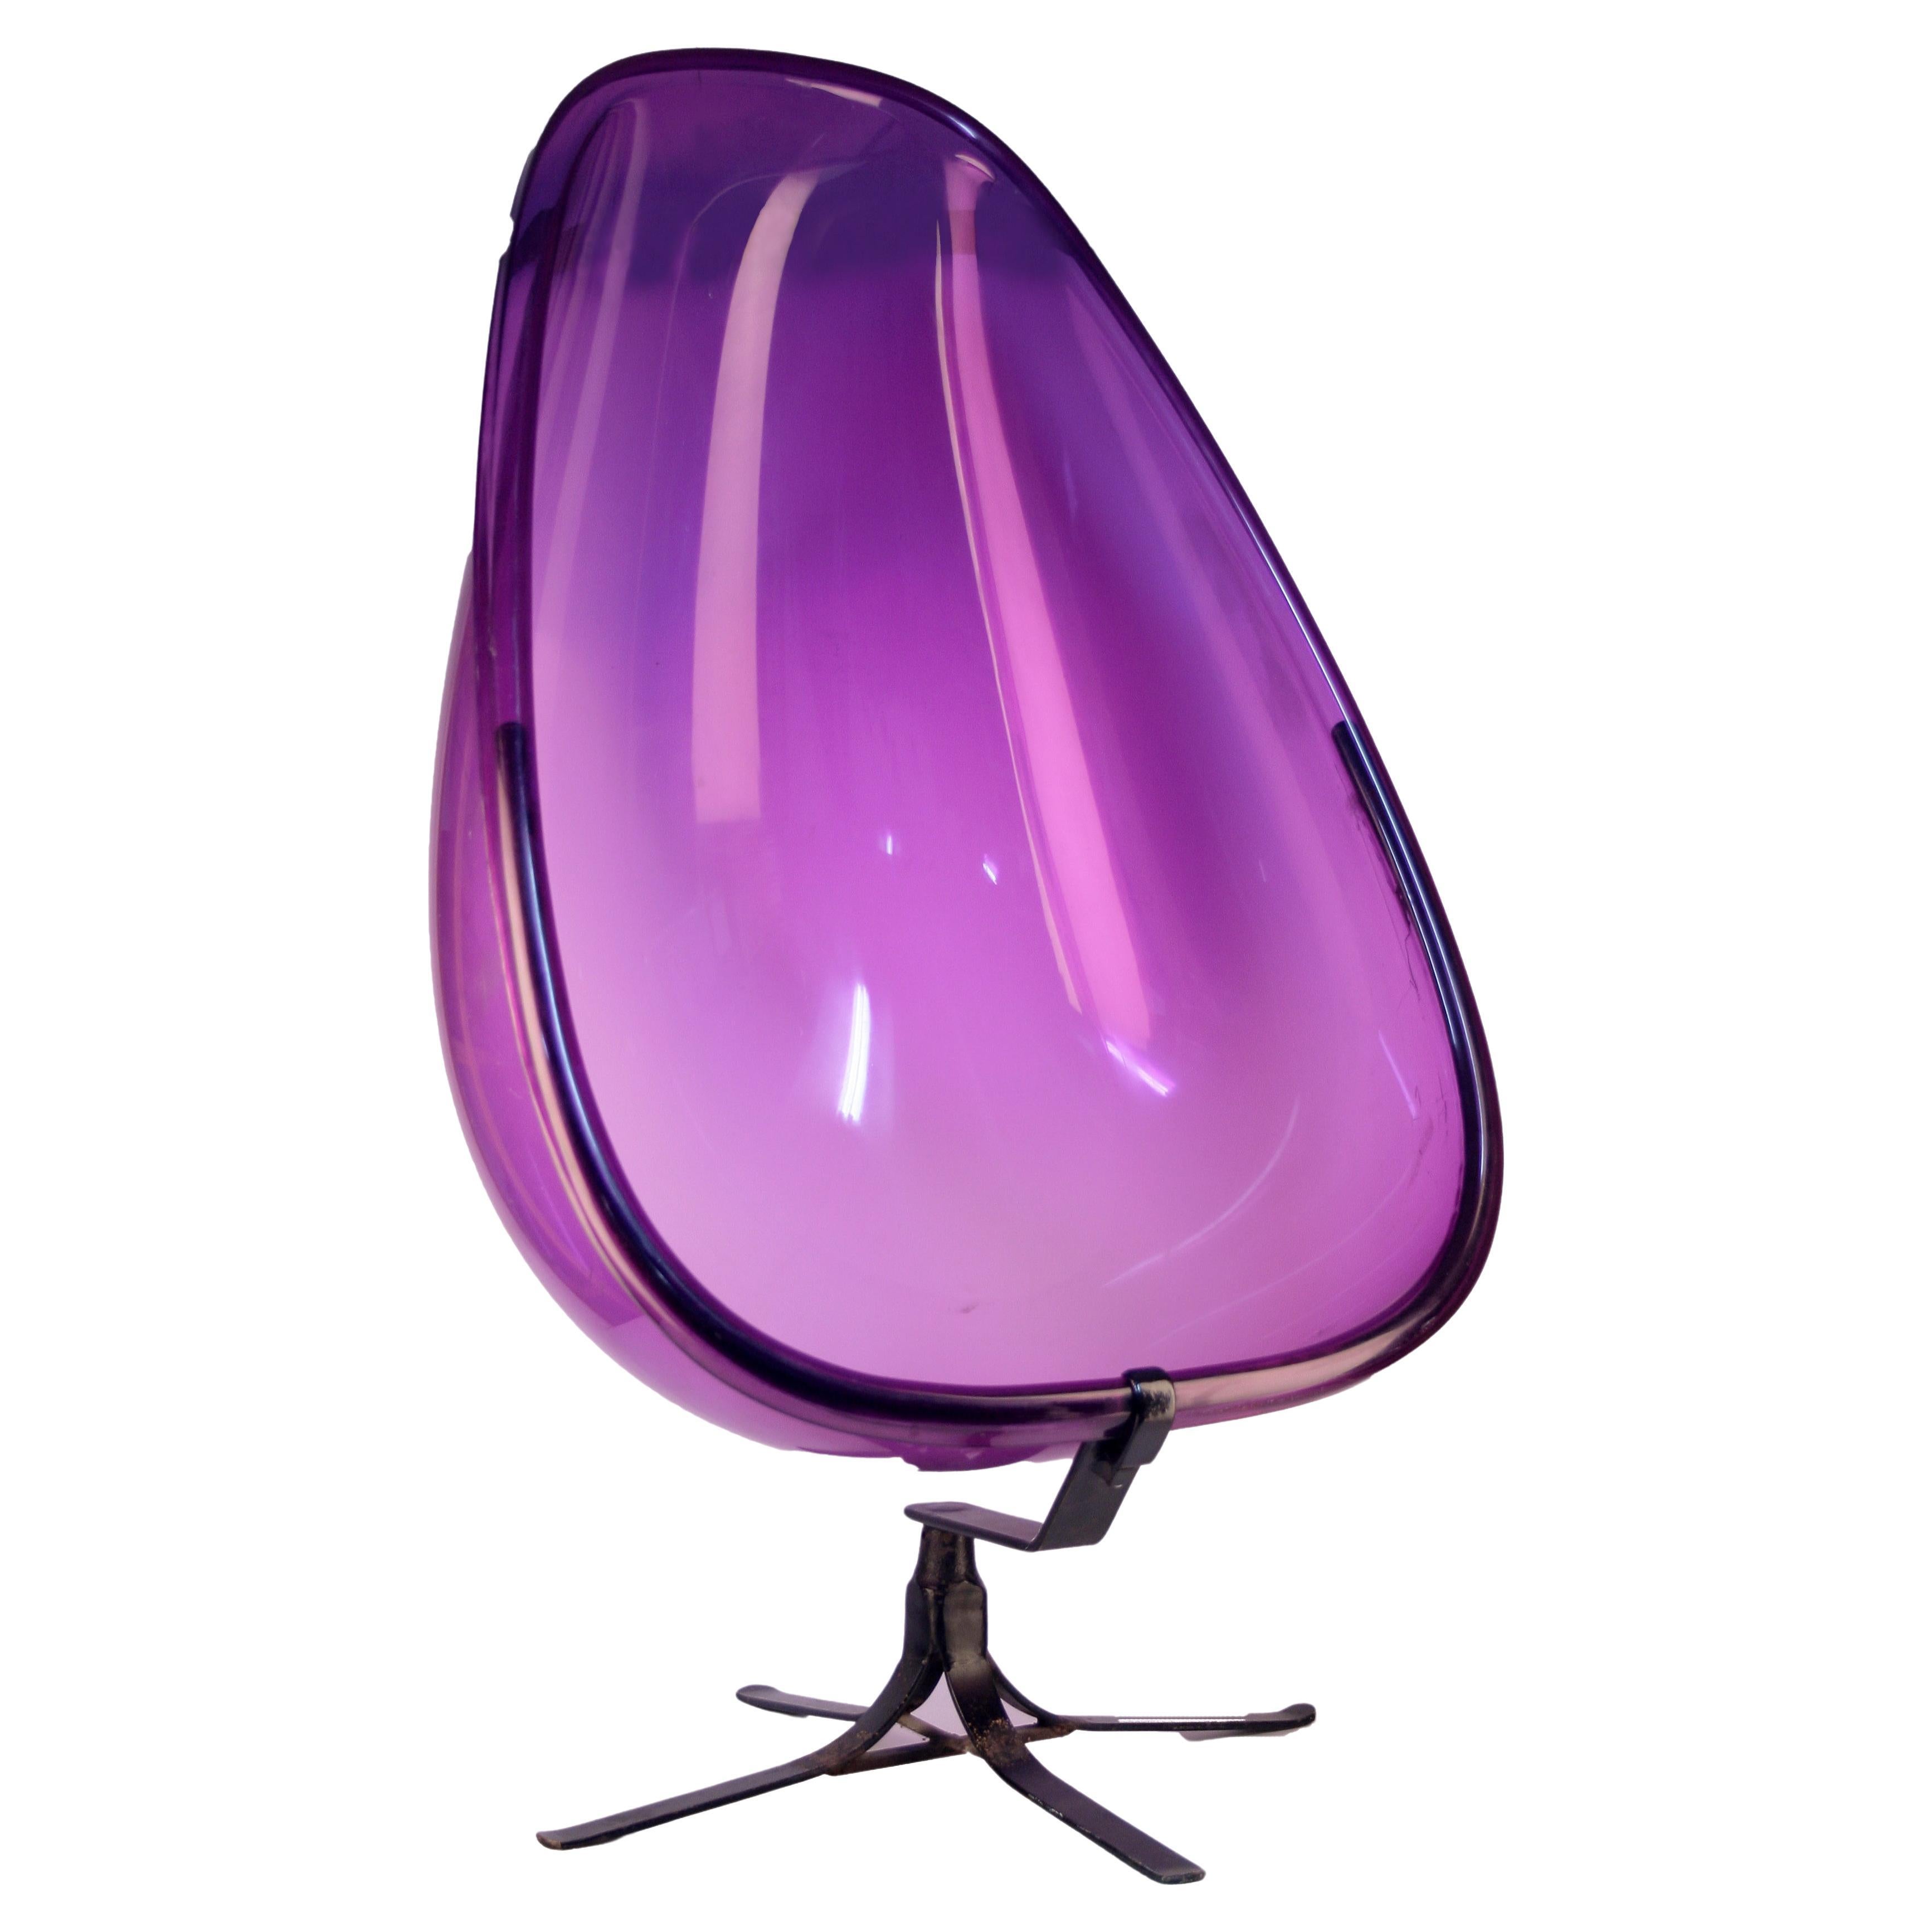 Mid-20th C. Modern American Egg Shaped Acrylic Purple Chair with Iron Legs For Sale